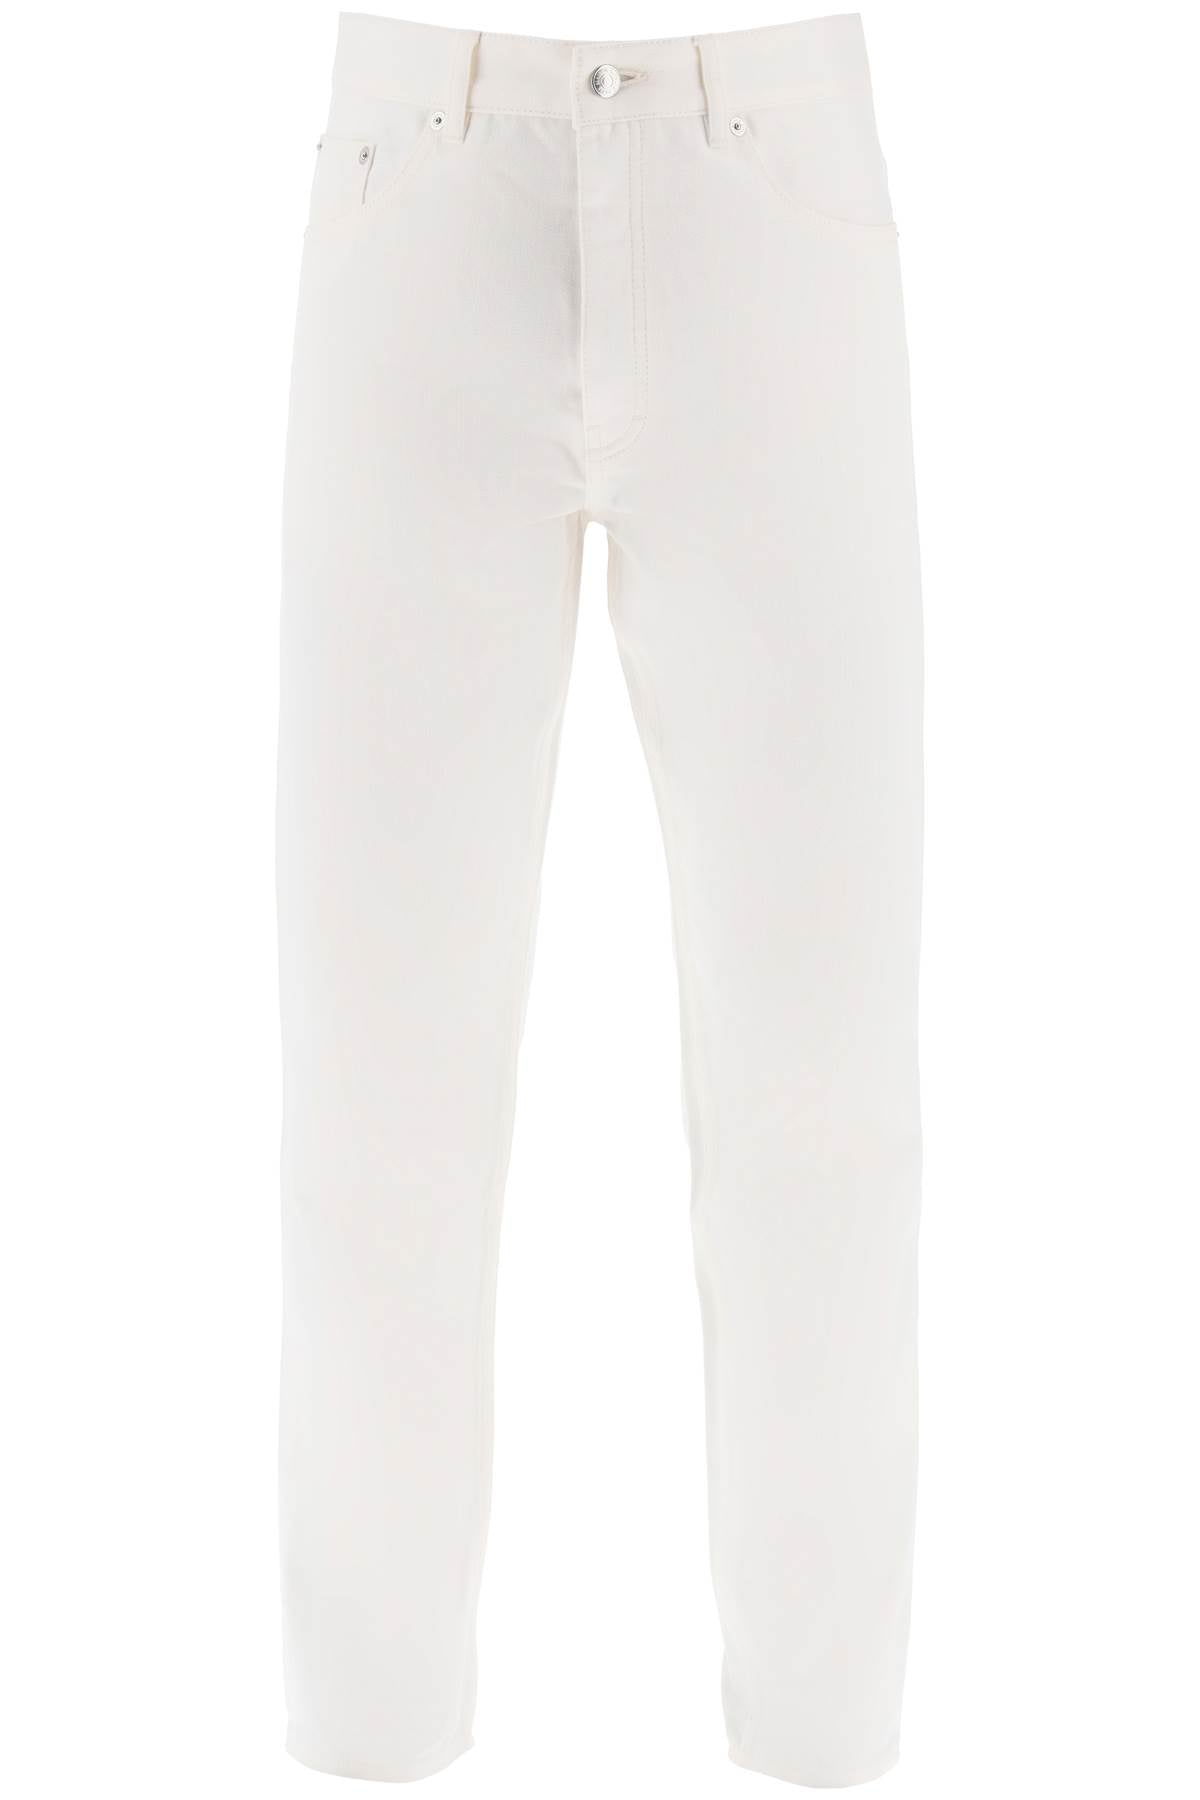 Maison kitsune low-rise tapered jeans-0